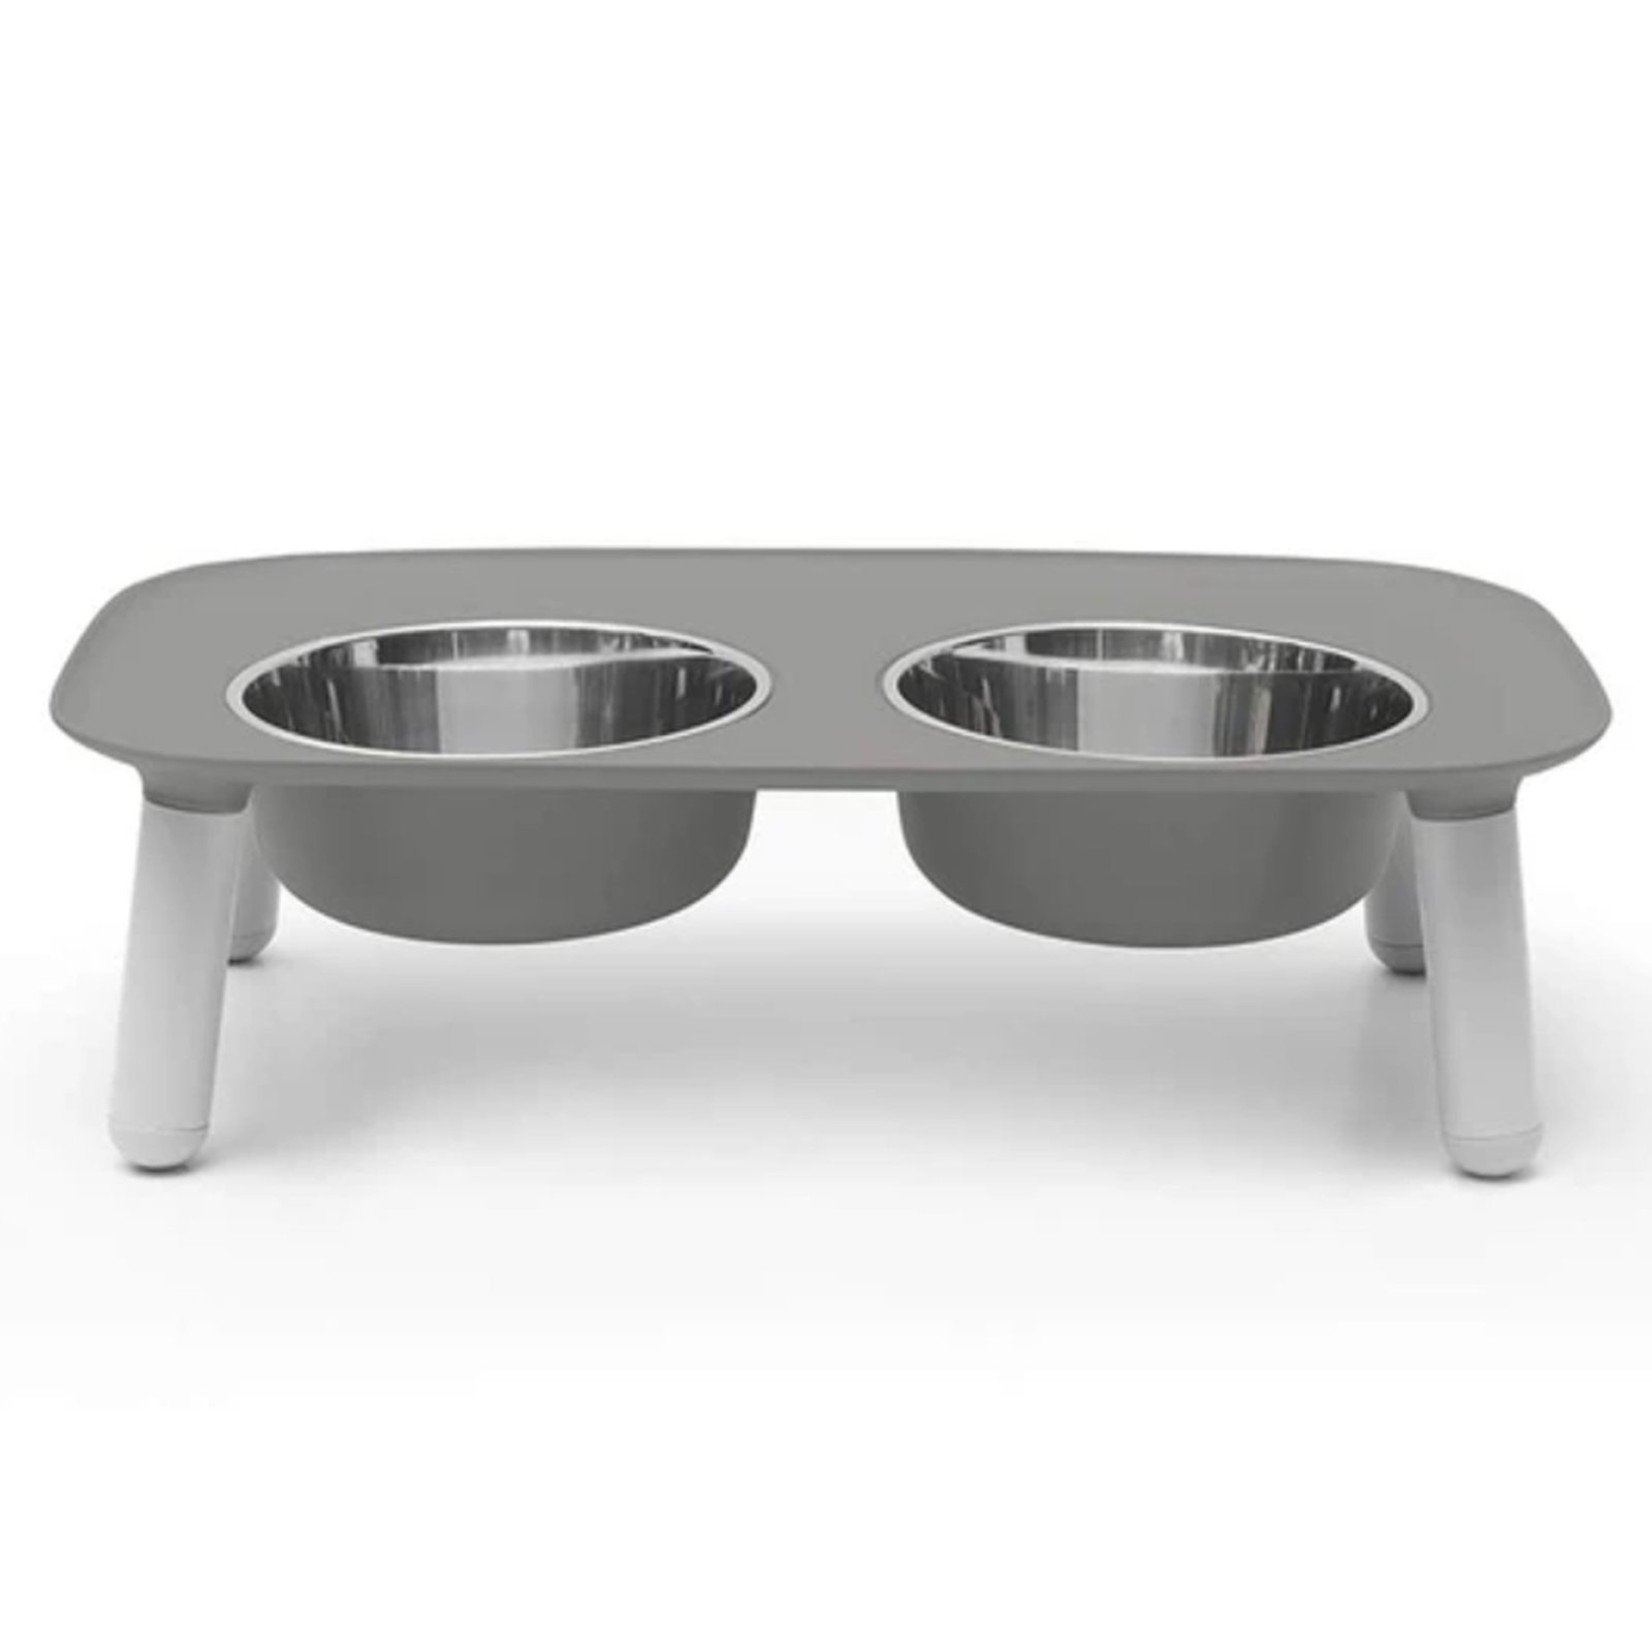 Messy Mutts FEEDER ELEVATED W/SS BOWLS DOUBLE DINER GRAY 5 CUP